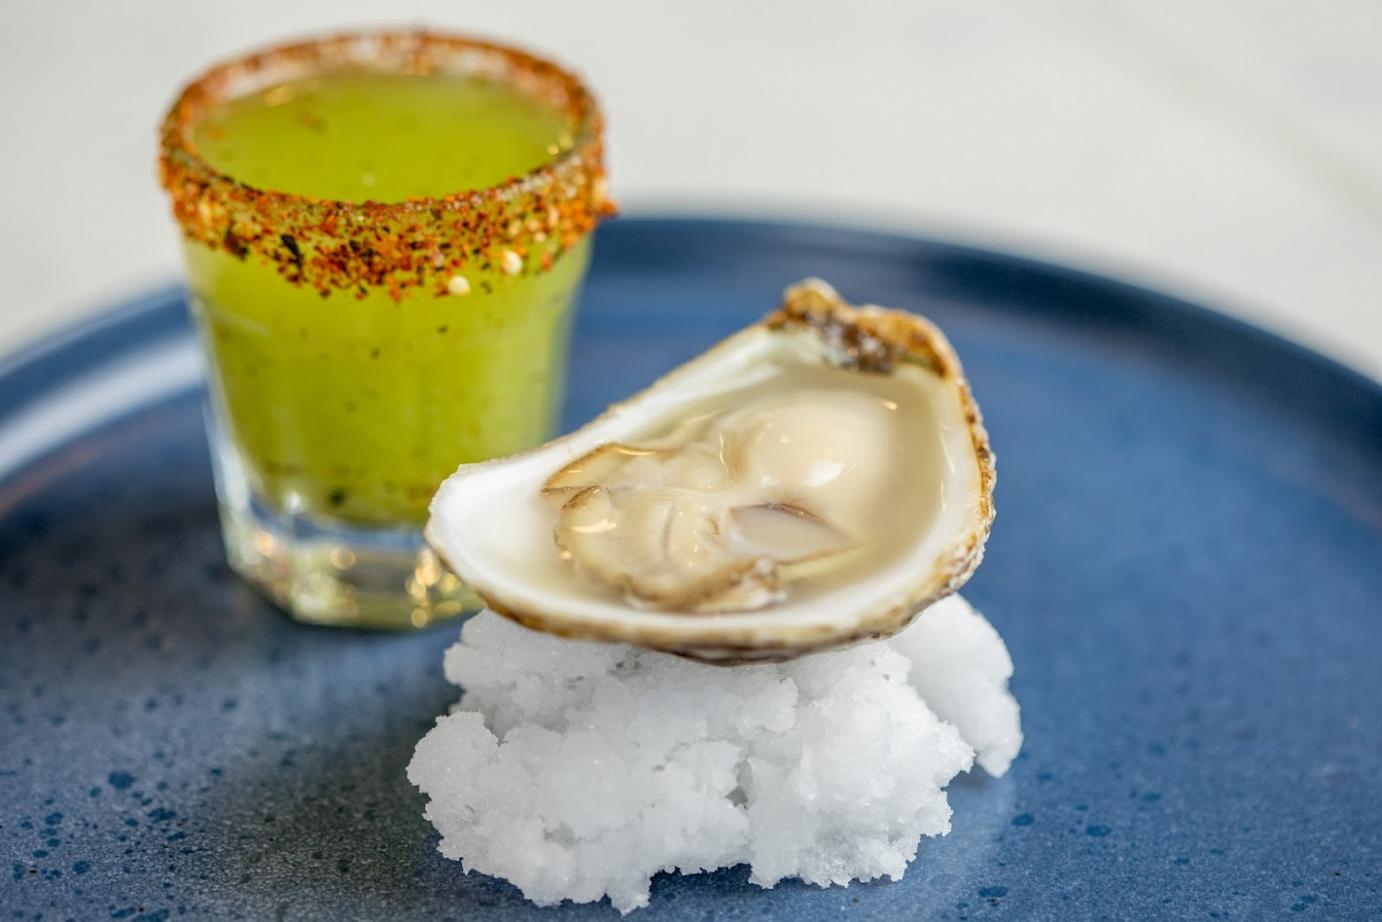 Oyster, drink on the side